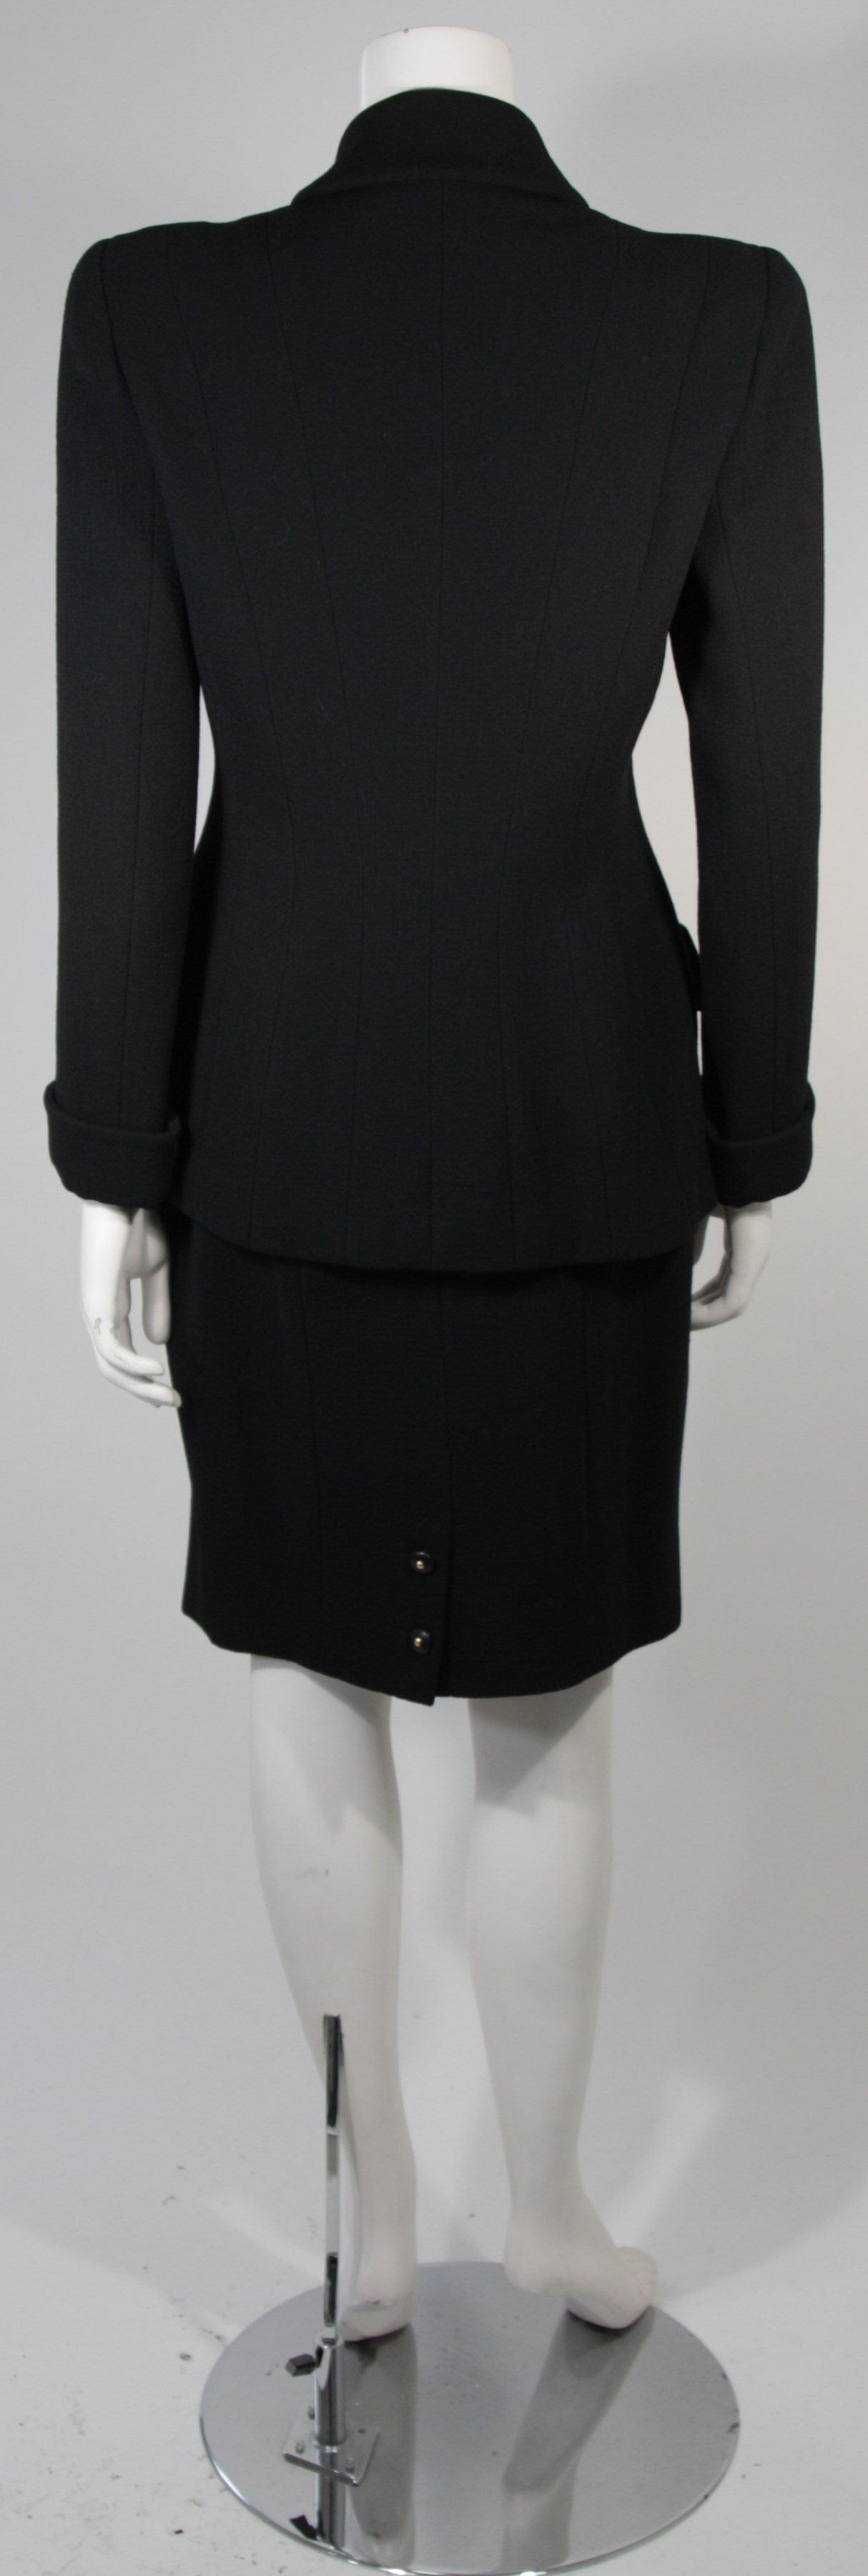 Chanel Black Wool Skirt Suit Size Military Inspired with Peter Pan Collar sz 8 3